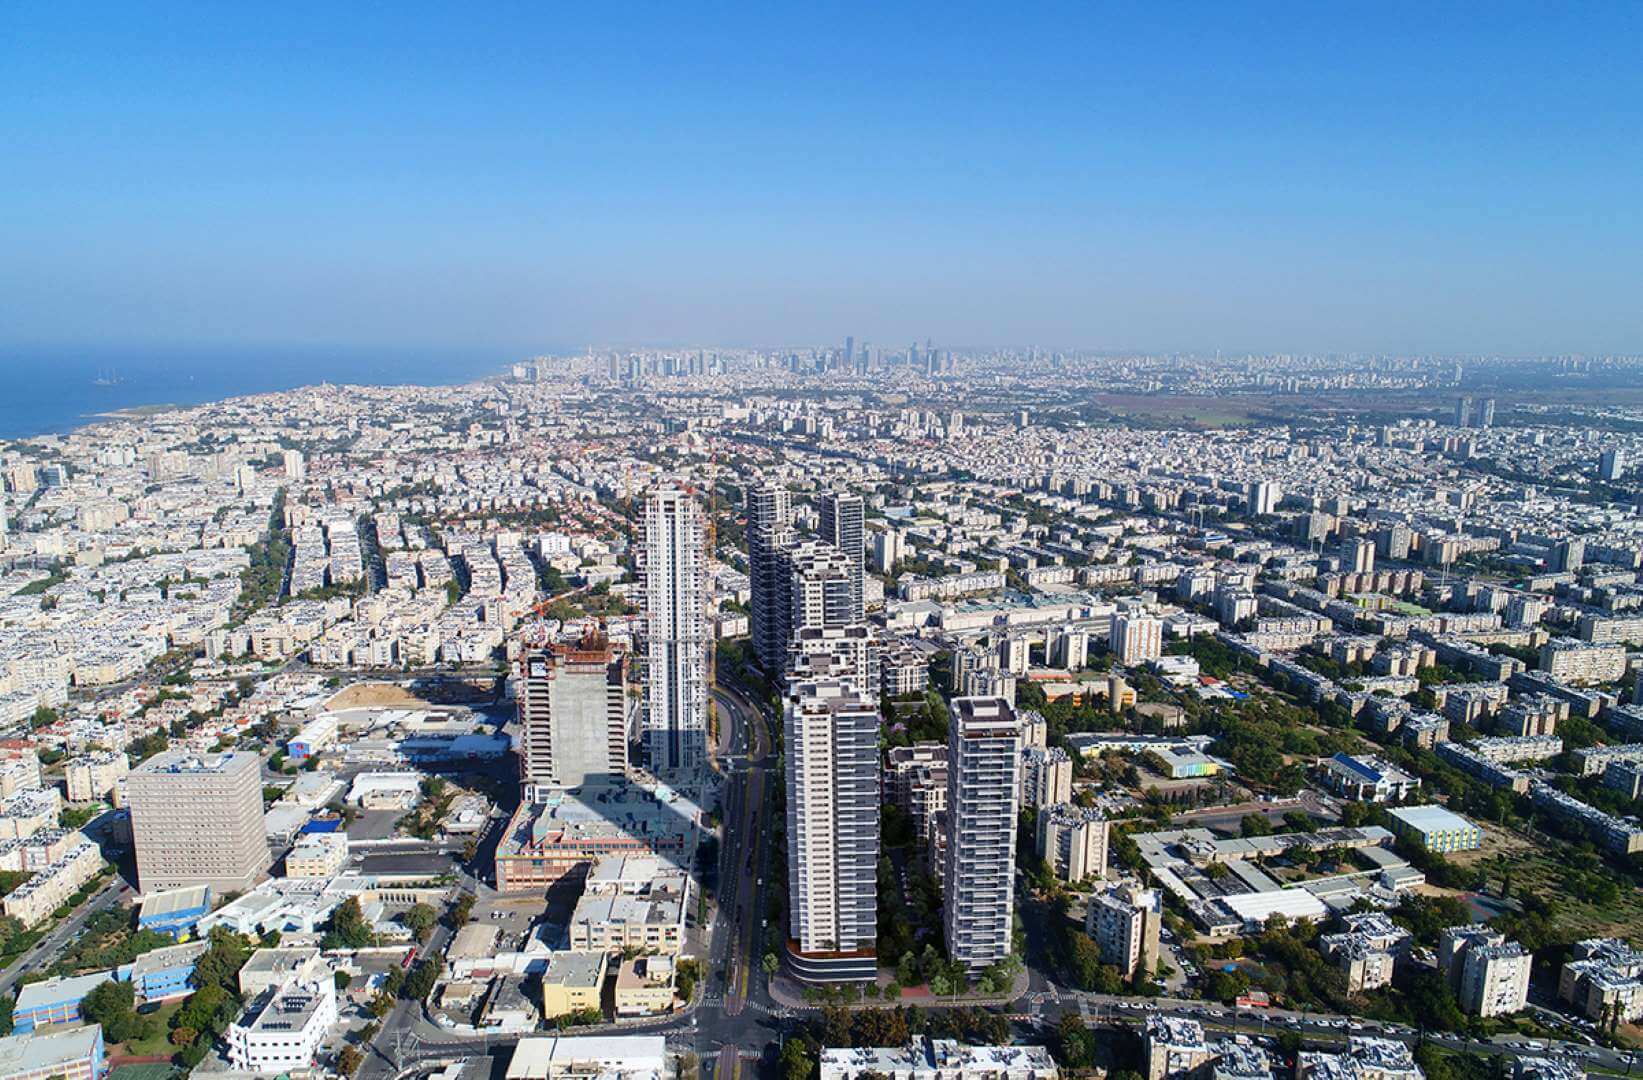 Photo of buildings from the green UNIK project in Bat Yam